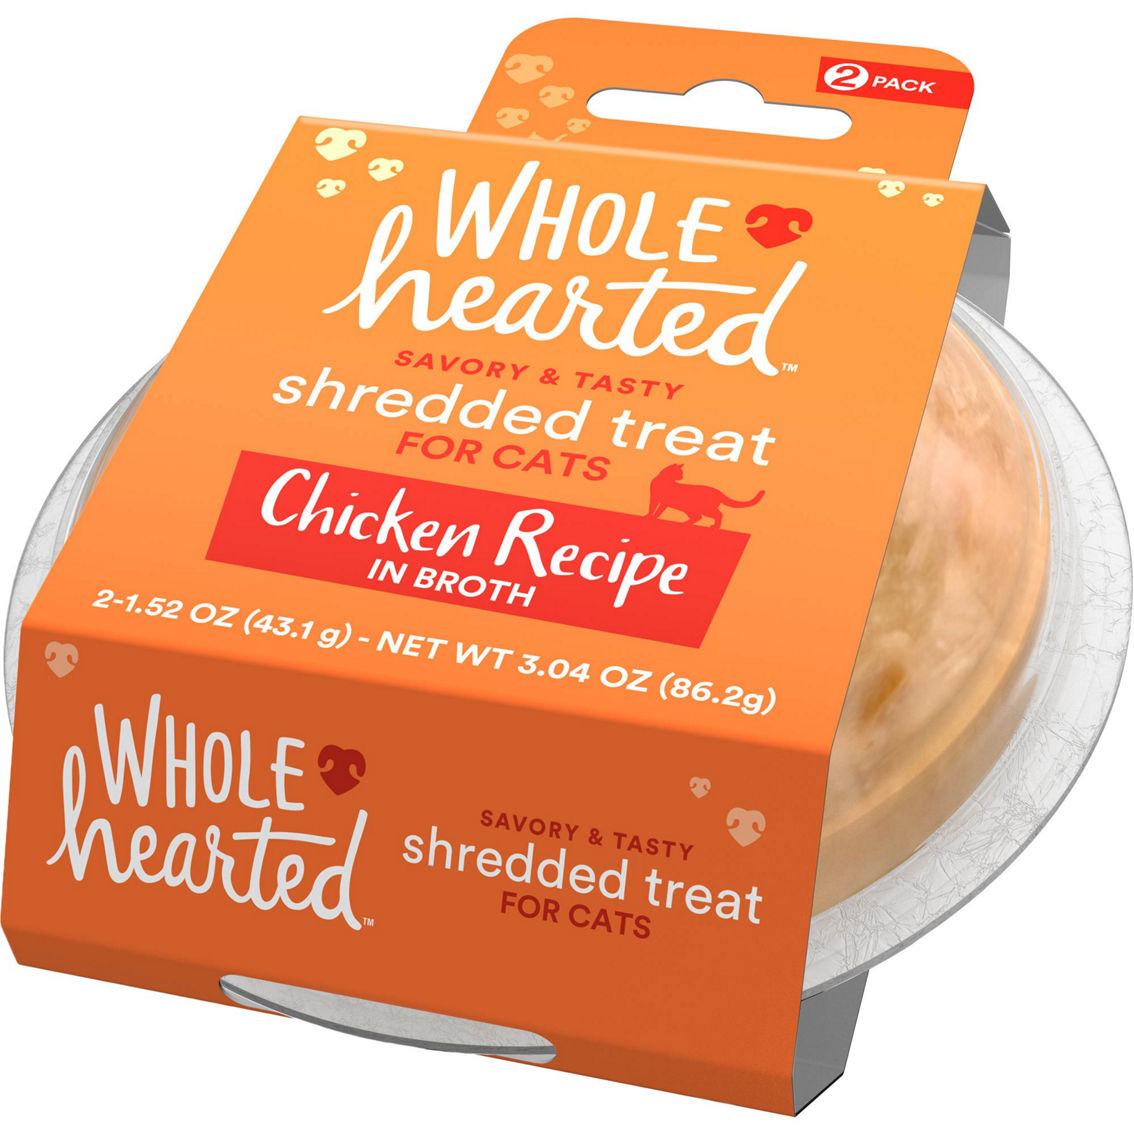 WholeHearted Grain Free Chicken Recipe Shredded Cat Treats 2 ct., 1.52 oz. - Image 5 of 8